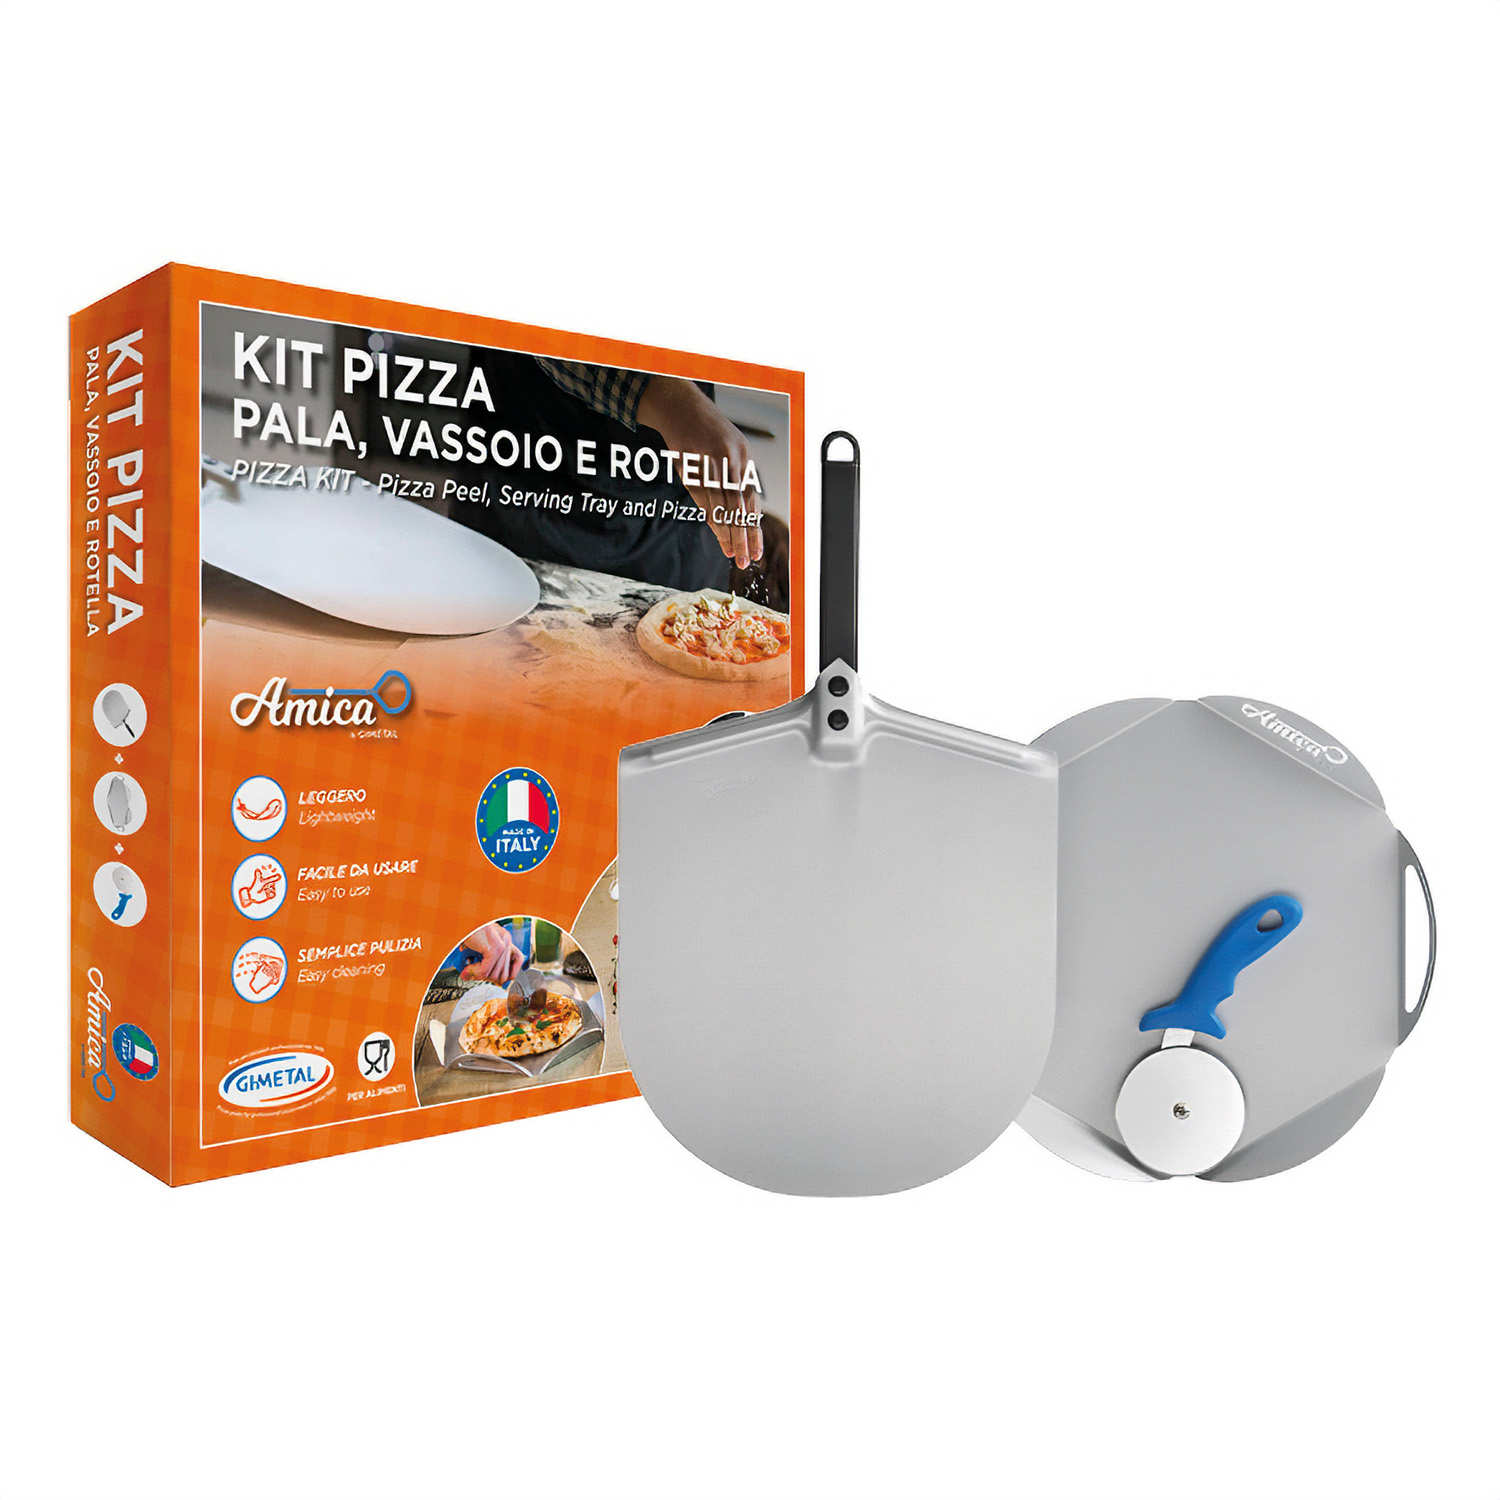 High quality stainless steel pizza kit: 30cm pizza peel, serving